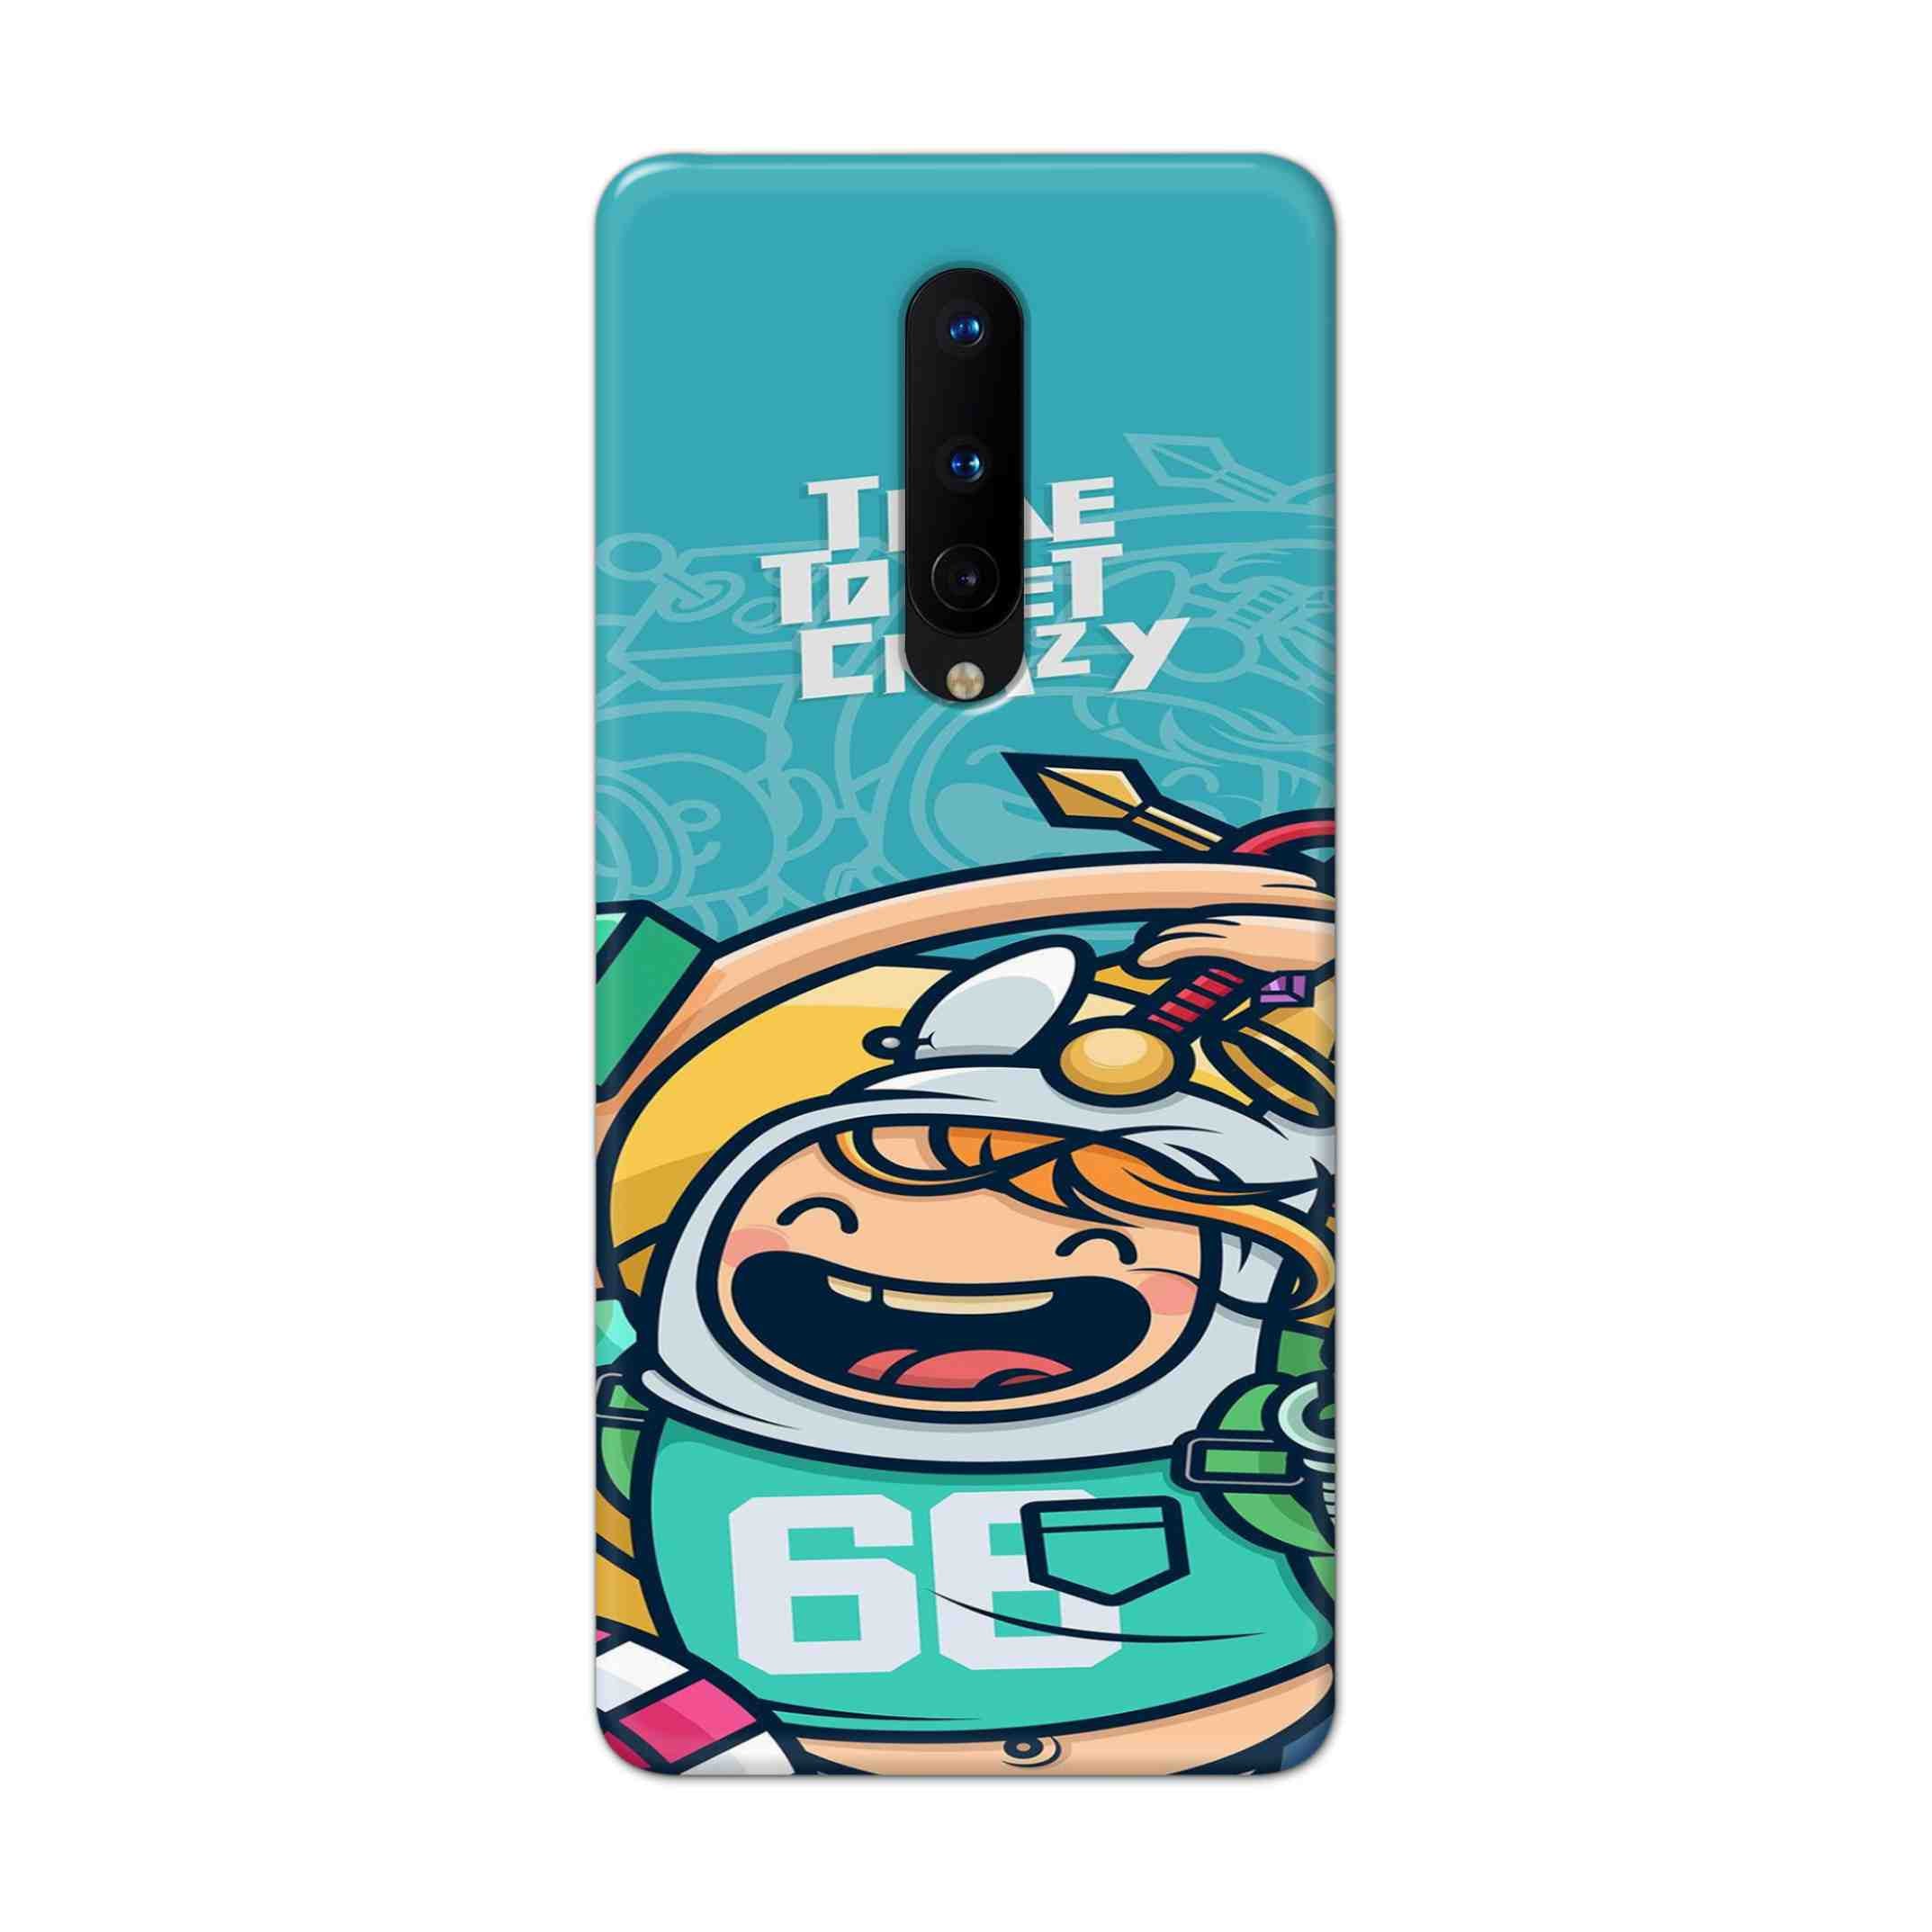 Buy Time To Get Crazy Hard Back Mobile Phone Case Cover For OnePlus 8 Online